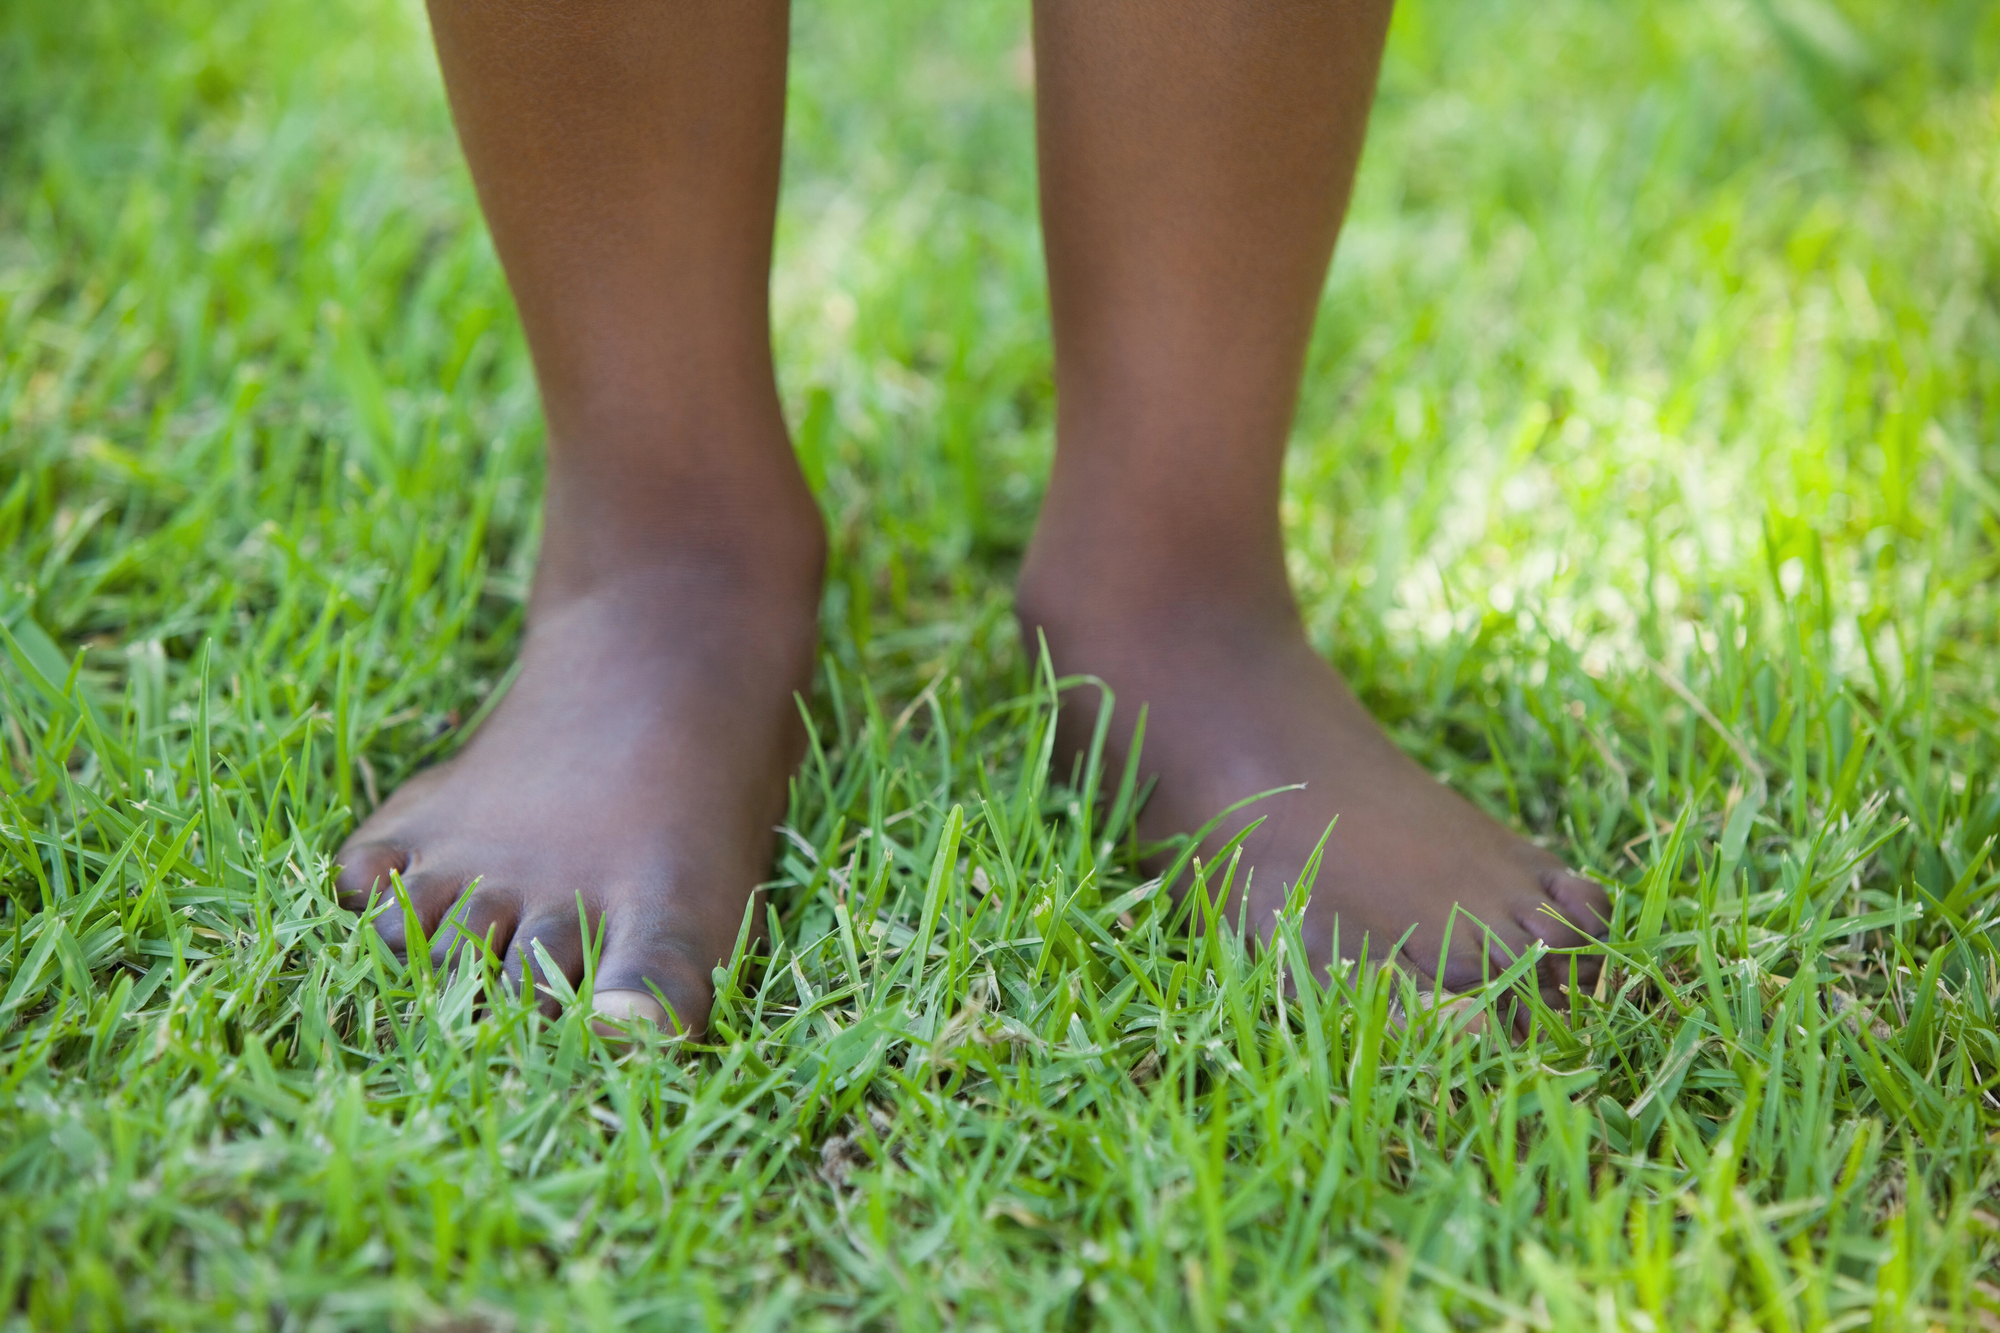 African american child with feet in green grass for reasons why children take off their shoes or walk barefoot.